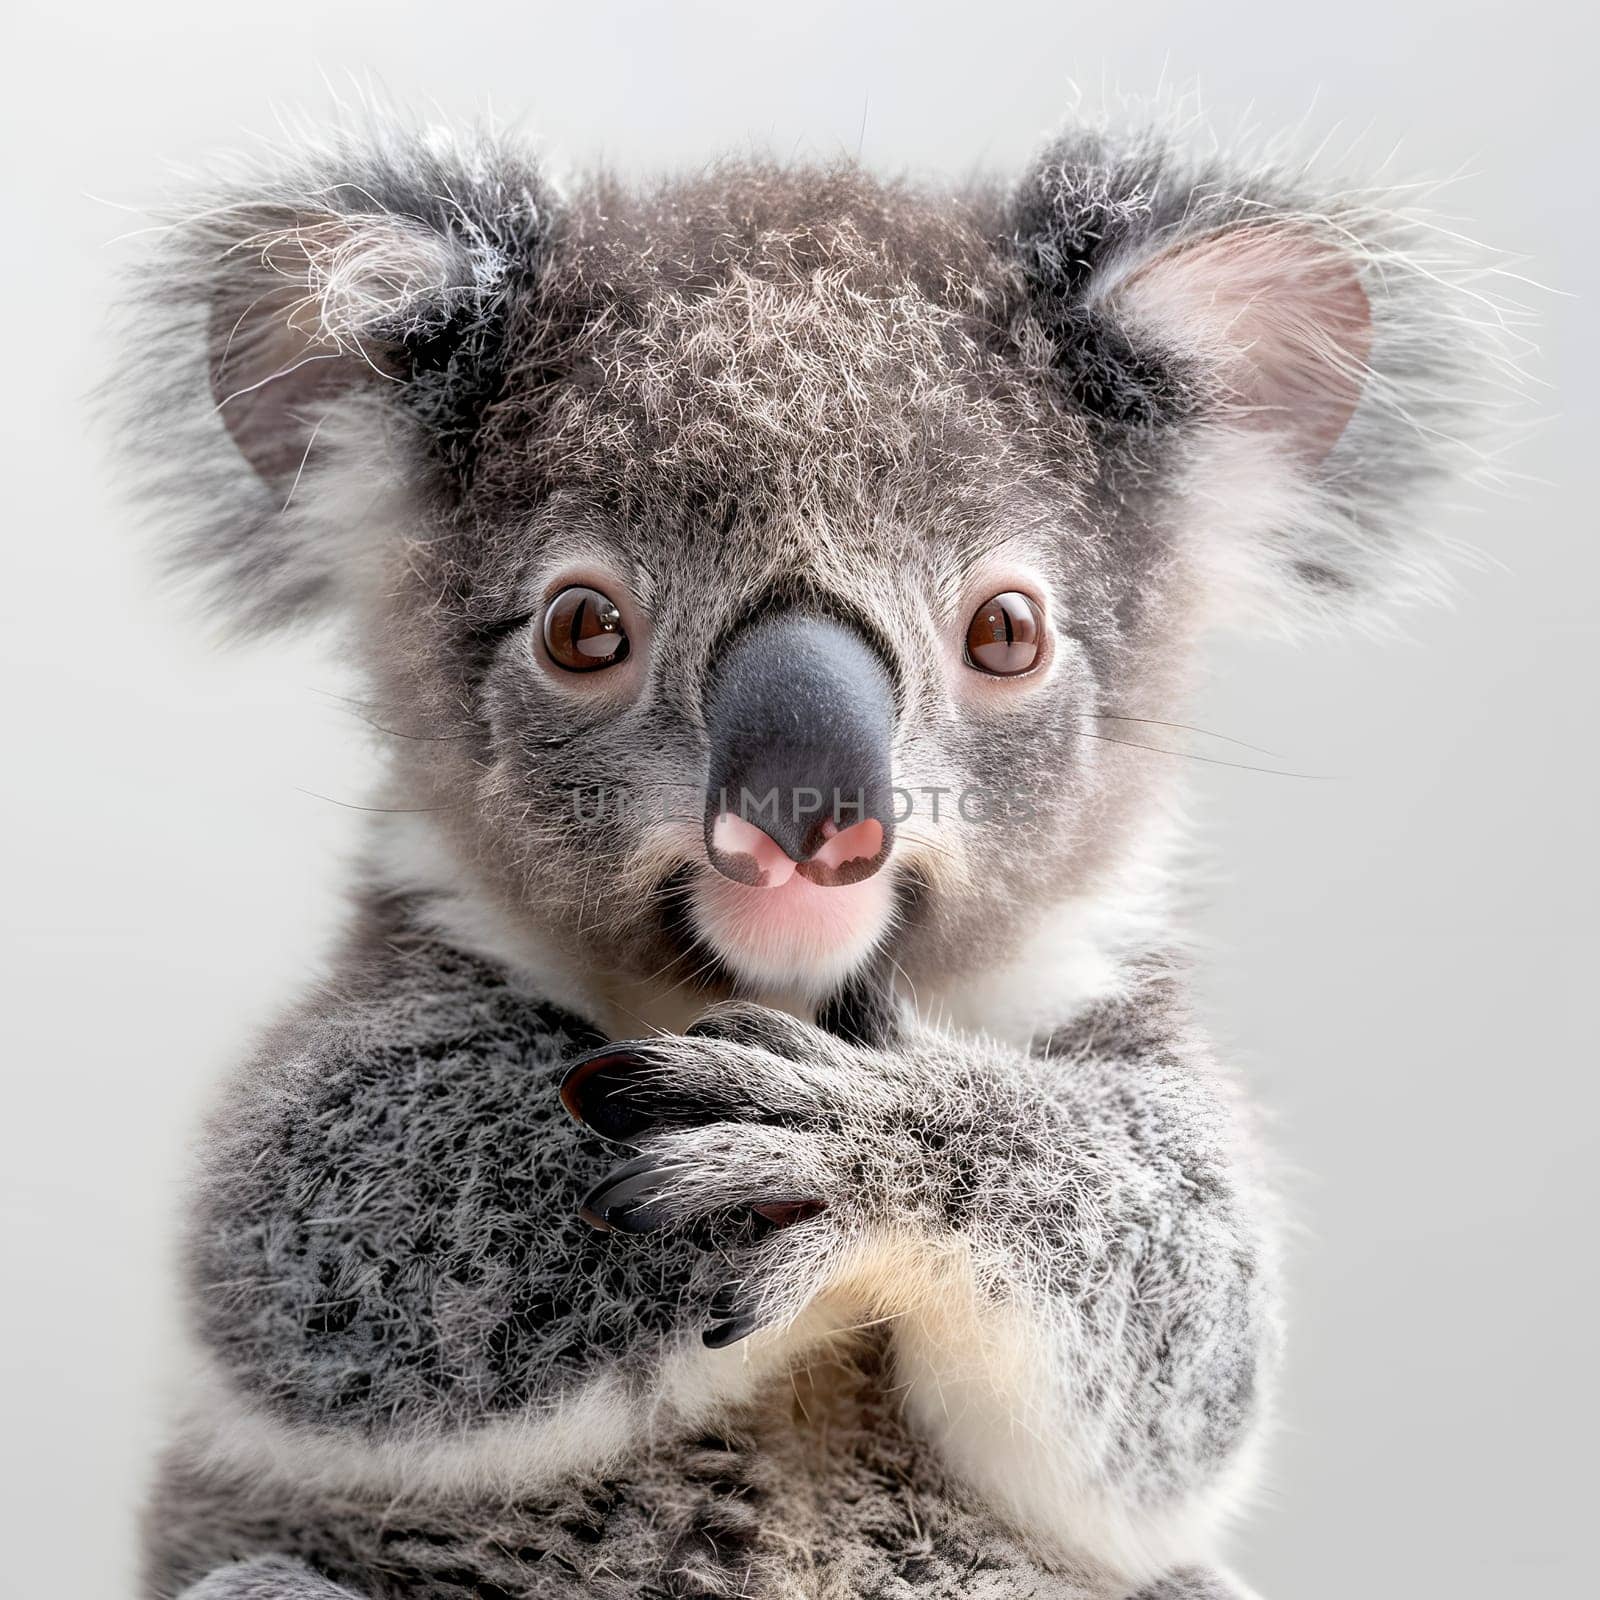 A grey Koala organism standing with crossed arms, looking at the camera by Nadtochiy